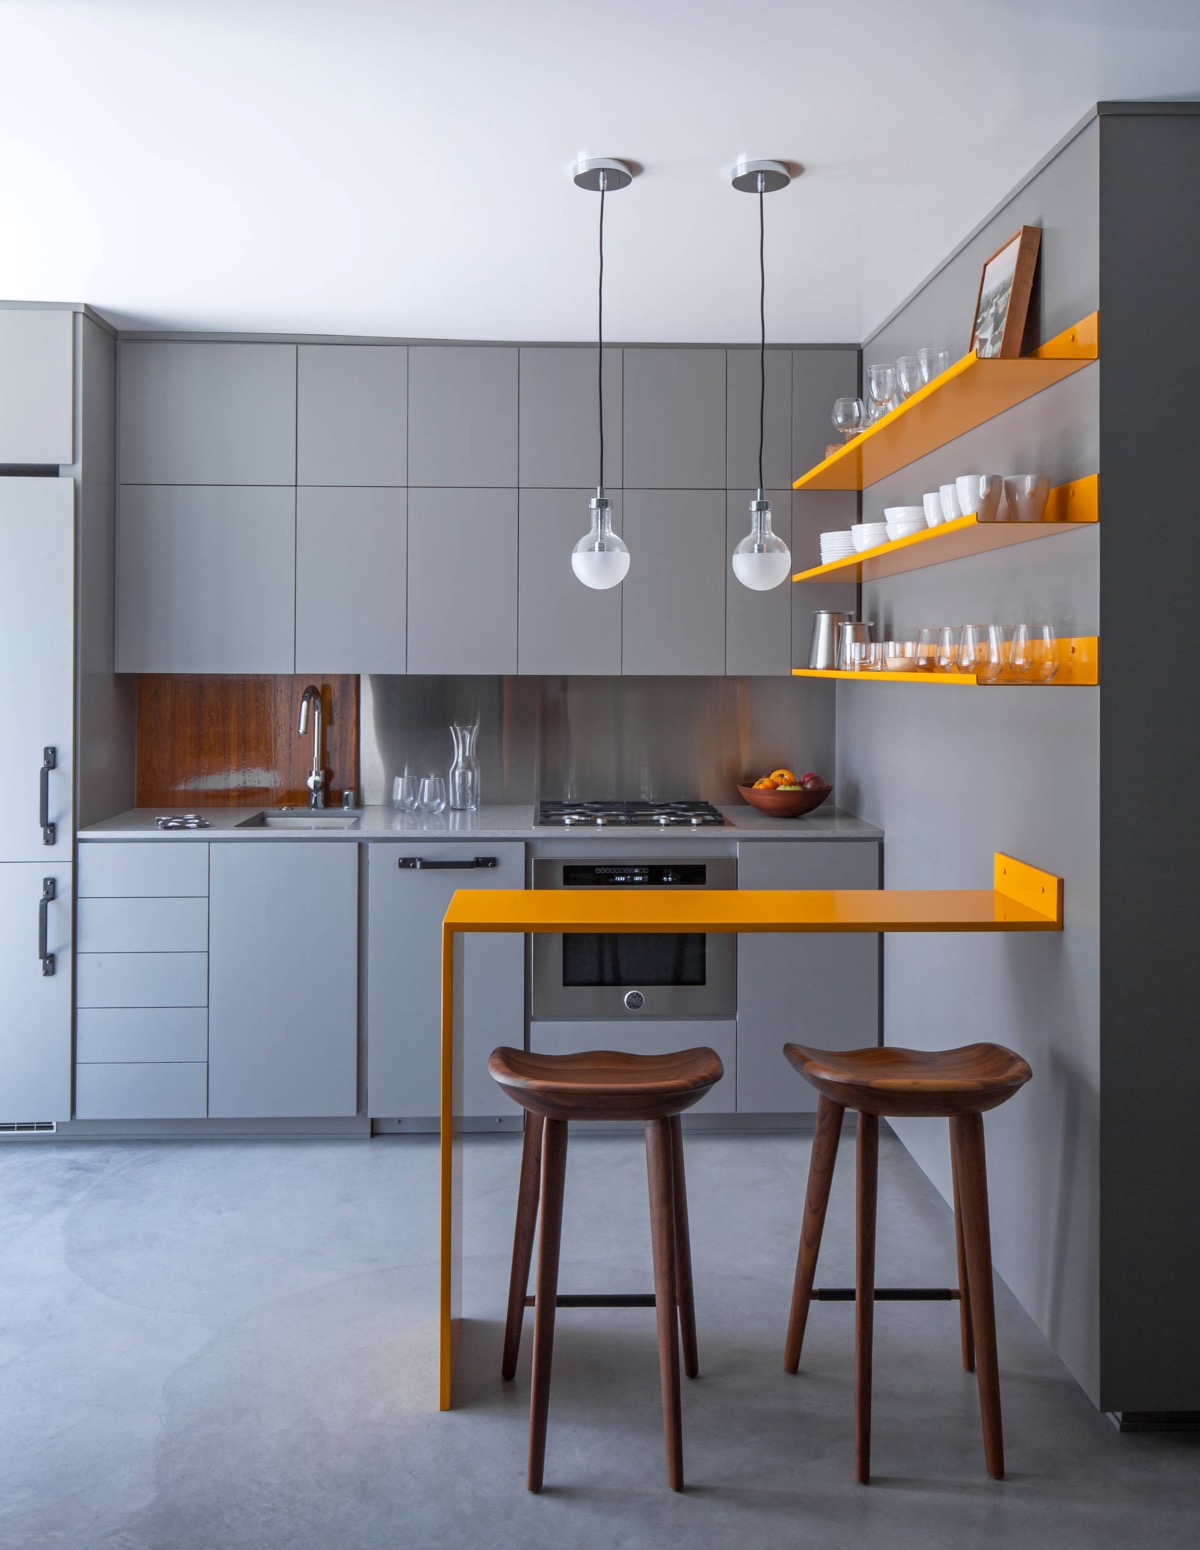 25 Splendid Small Kitchens And Ideas You Can Use From Them